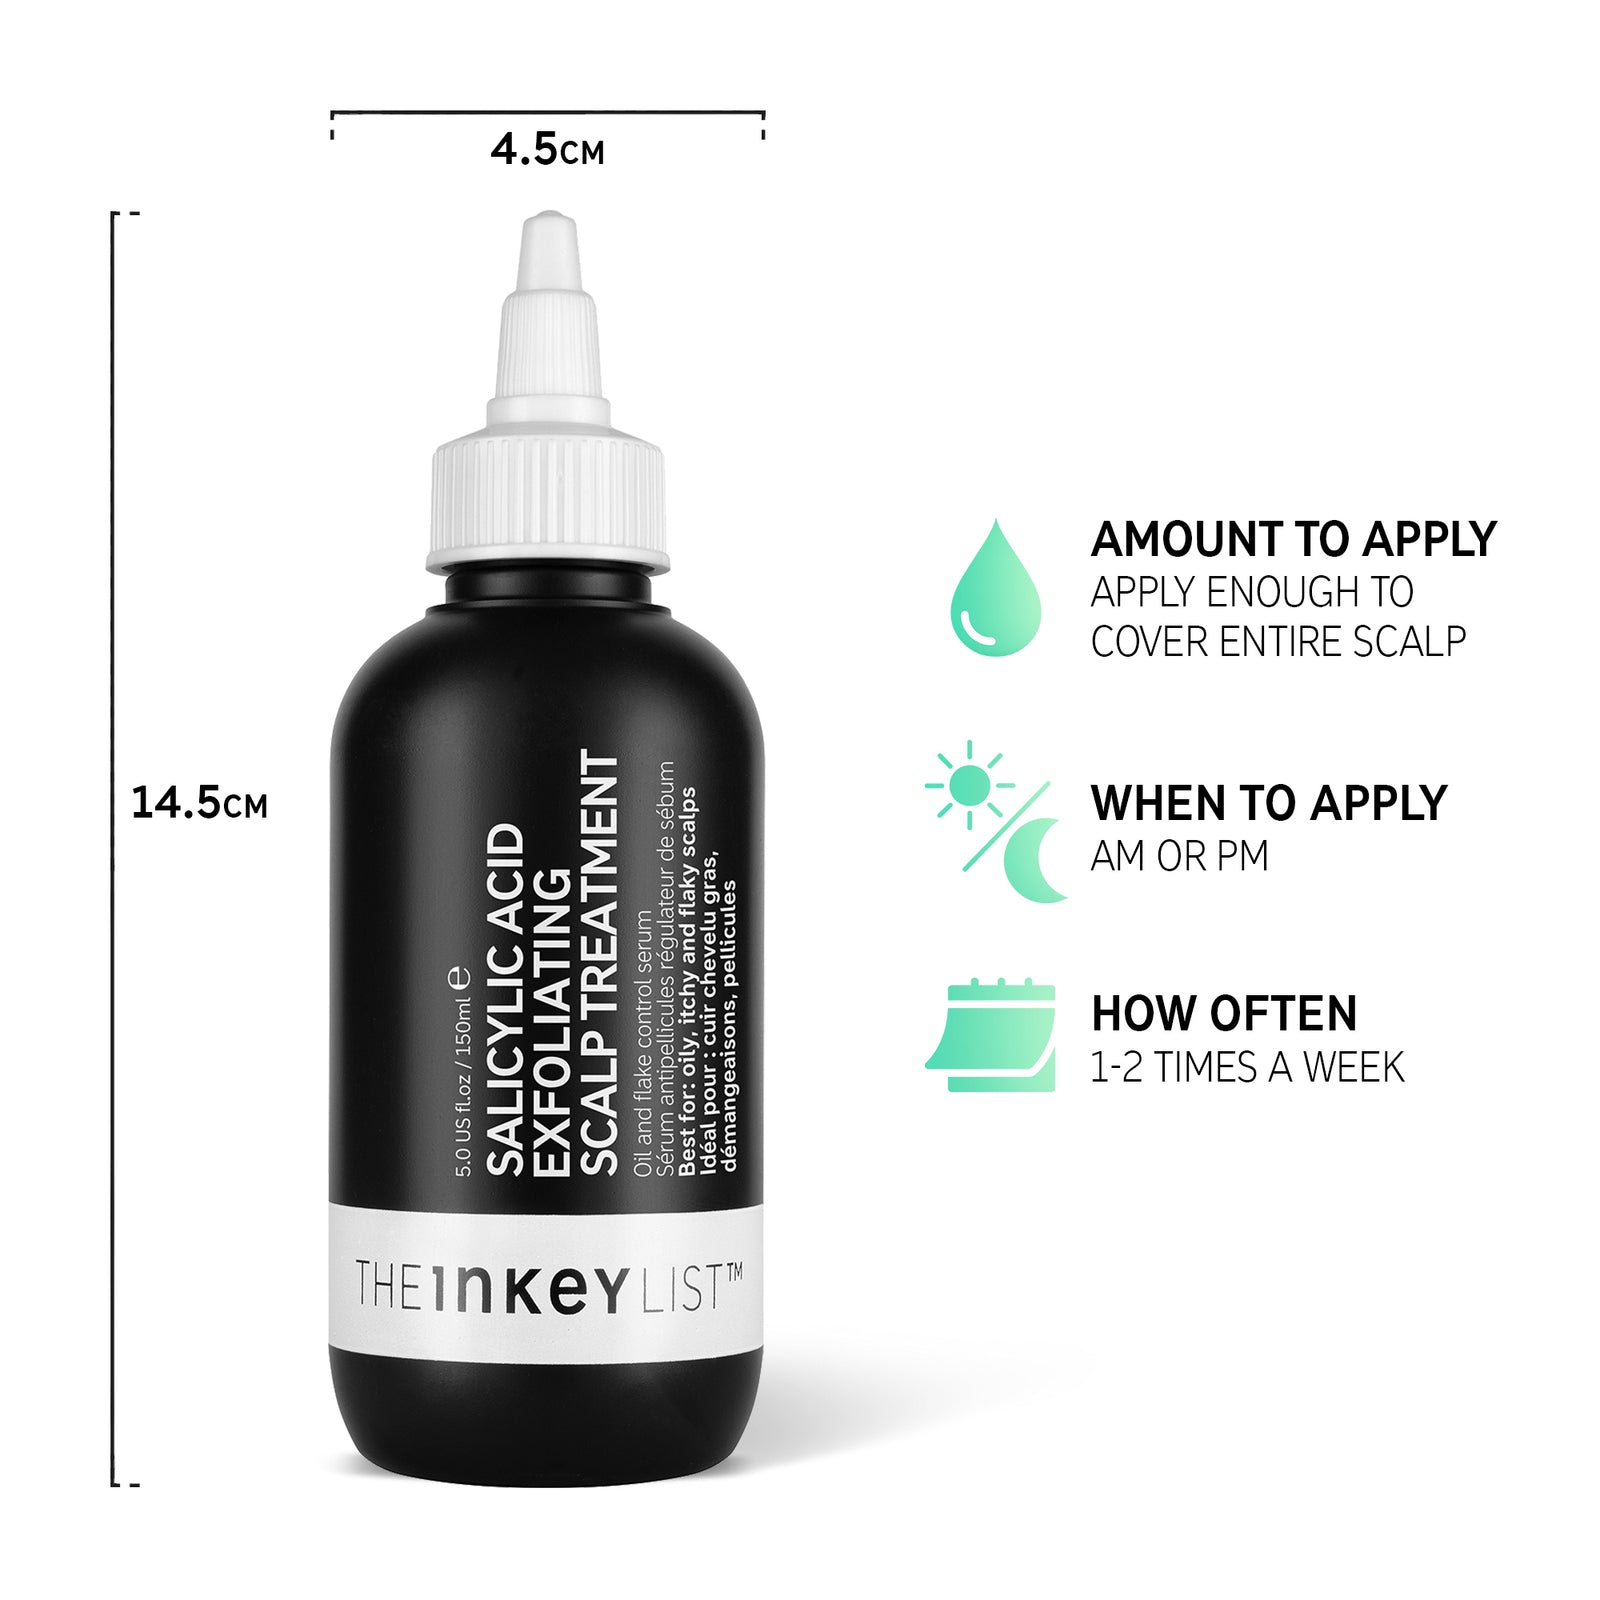 Salicylic Acid Exfoliating Scalp Treatment bottle with when and how to use infographic. Product dimension 14.5cm x 4.5cm